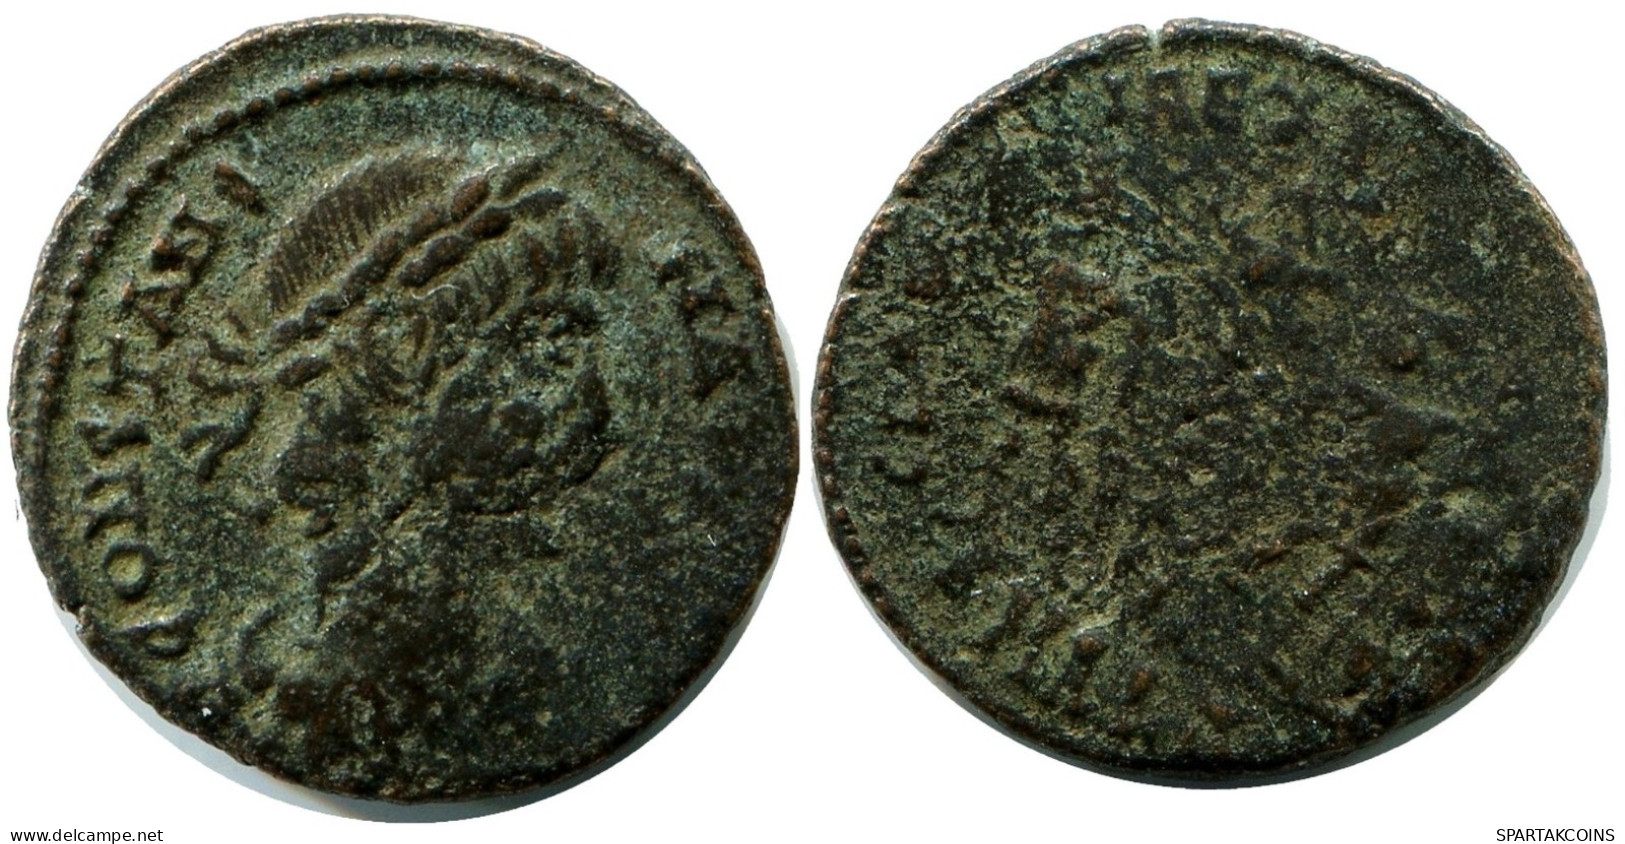 CONSTANS MINTED IN ALEKSANDRIA FROM THE ROYAL ONTARIO MUSEUM #ANC11428.14.F.A - Der Christlischen Kaiser (307 / 363)